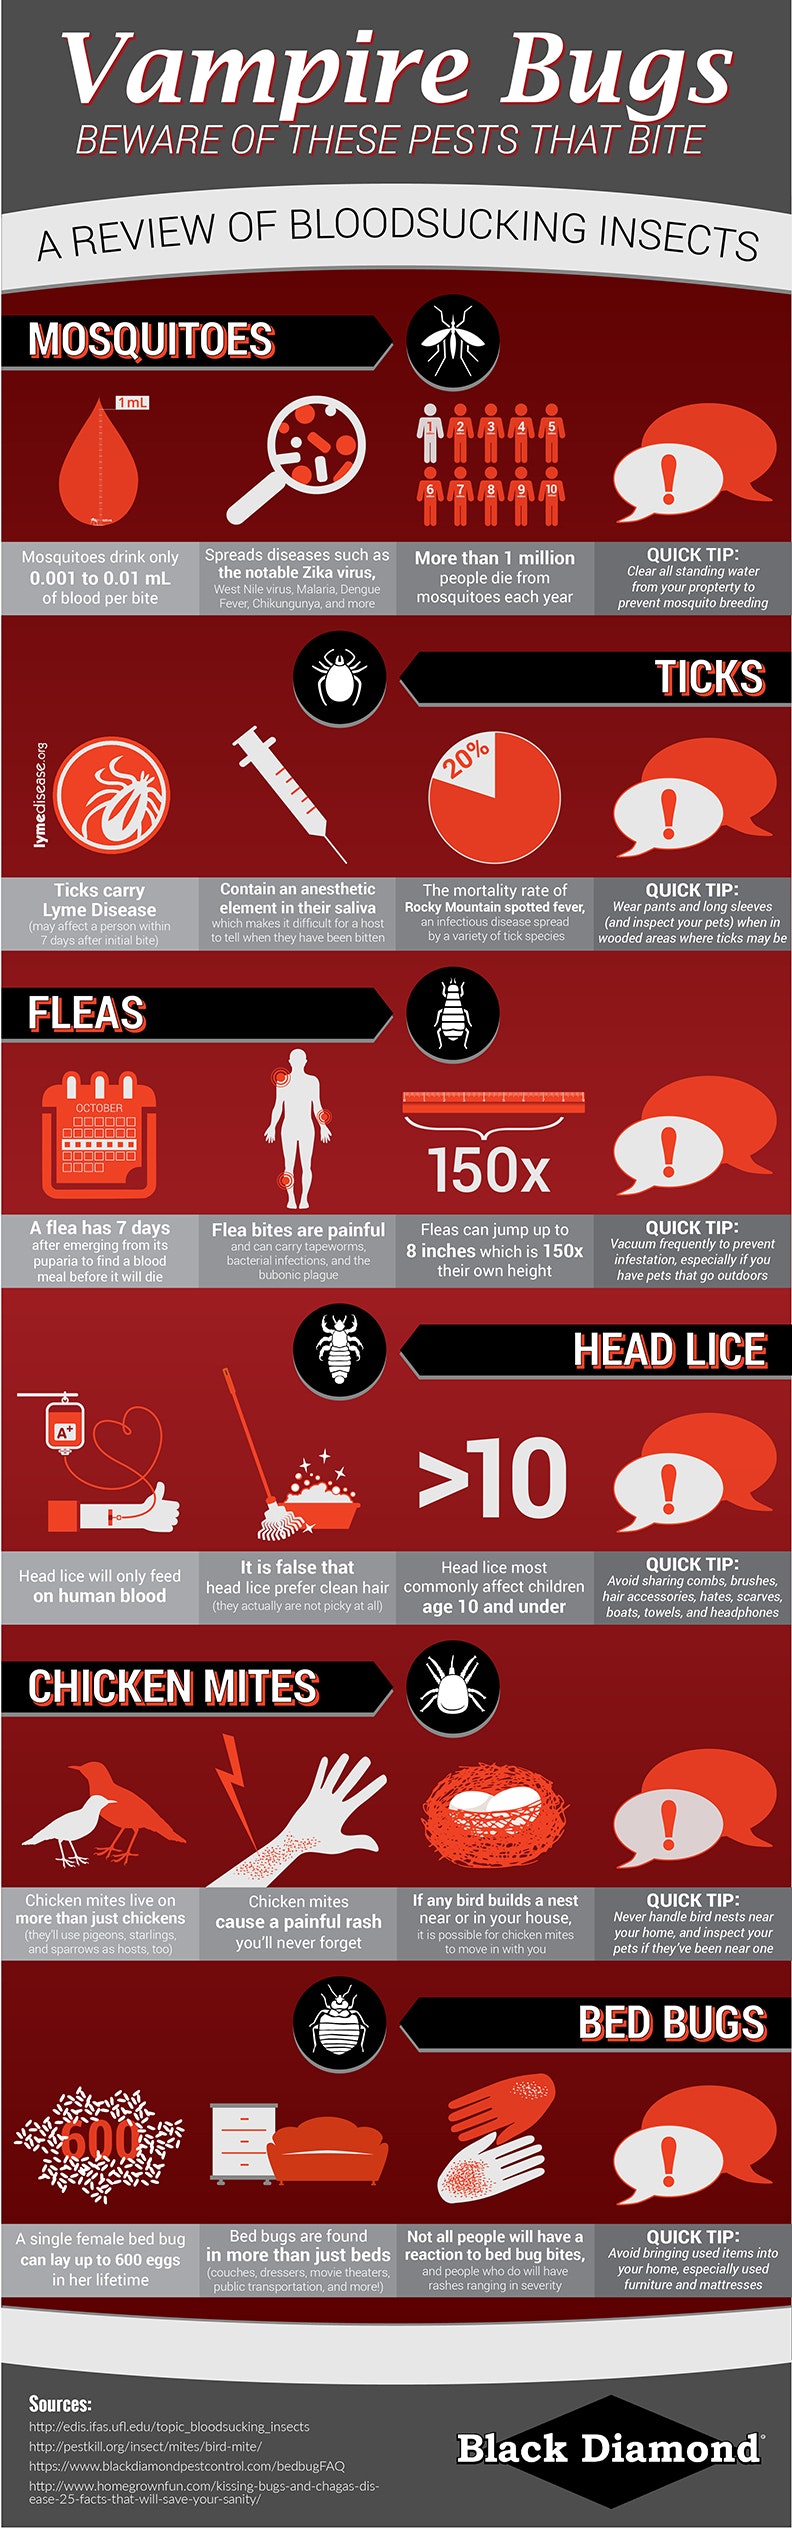 Bloodsucking Insect Infographic